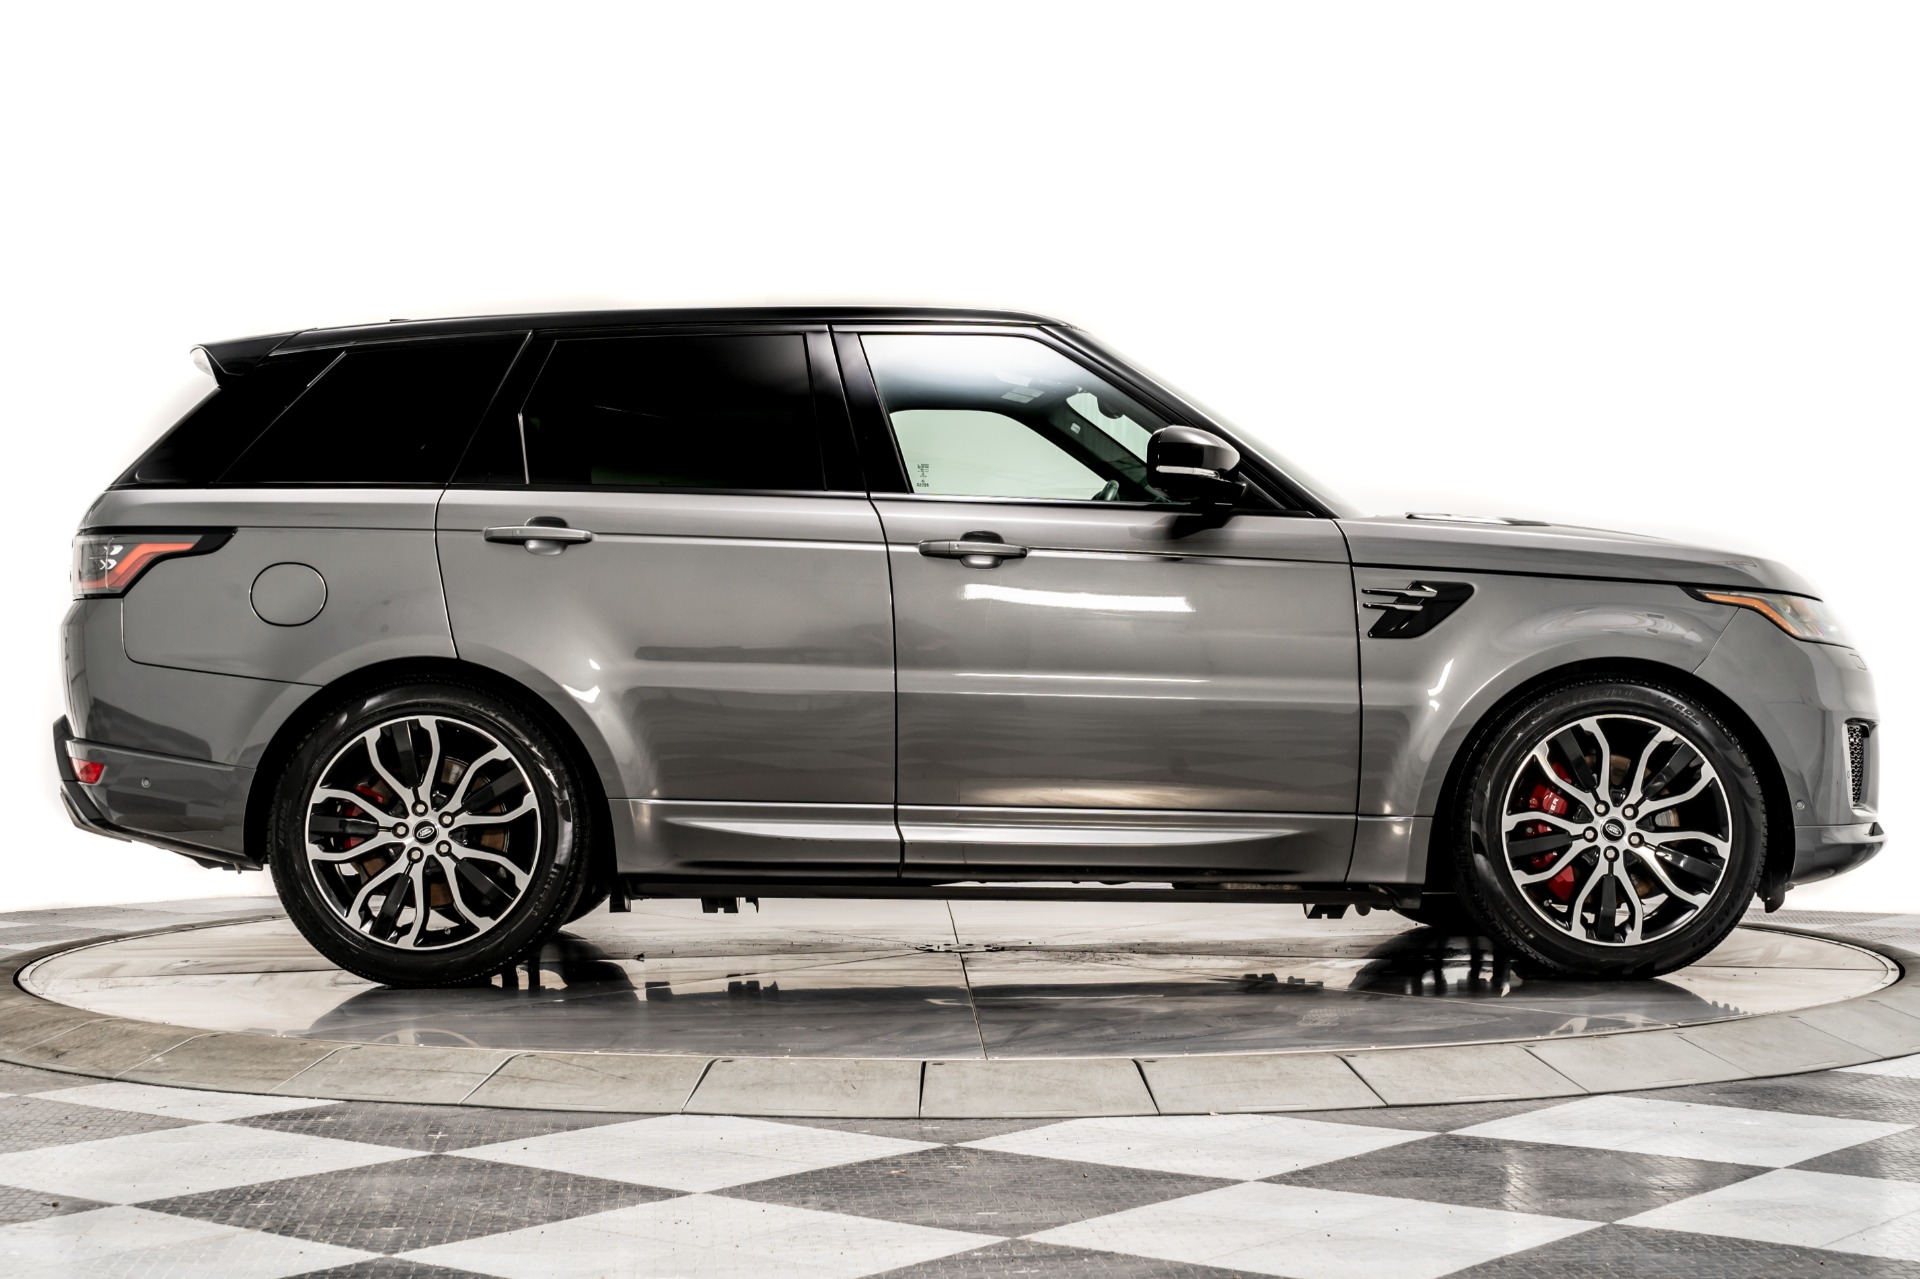 2016 Range Rover Sport in custom color Scotia Gray. What a beauty!!